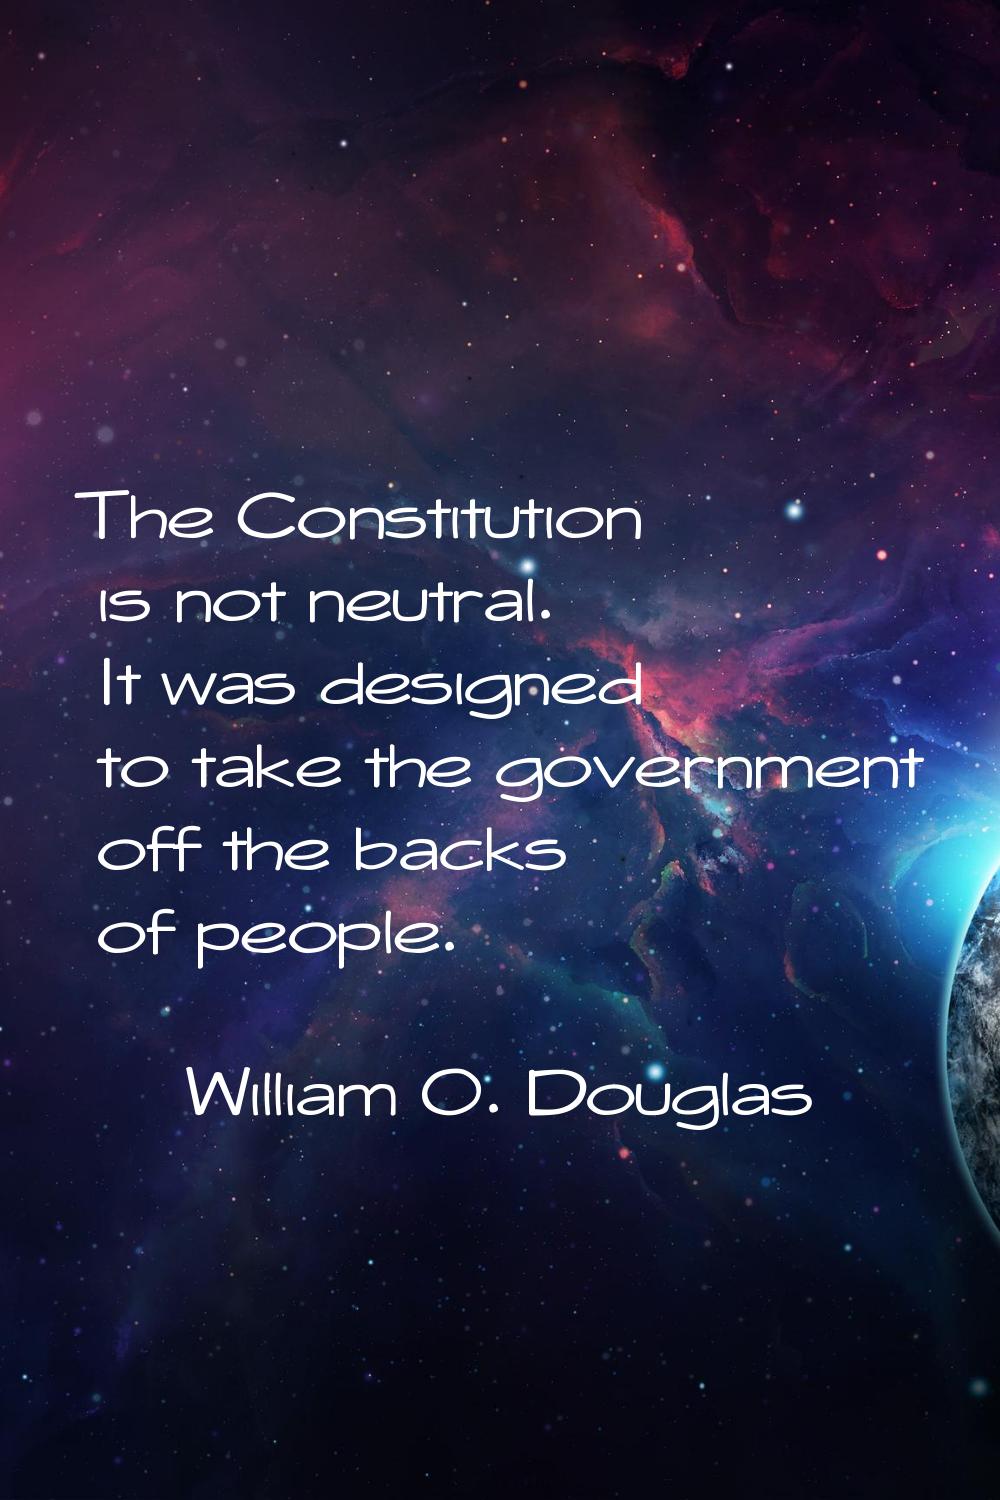 The Constitution is not neutral. It was designed to take the government off the backs of people.